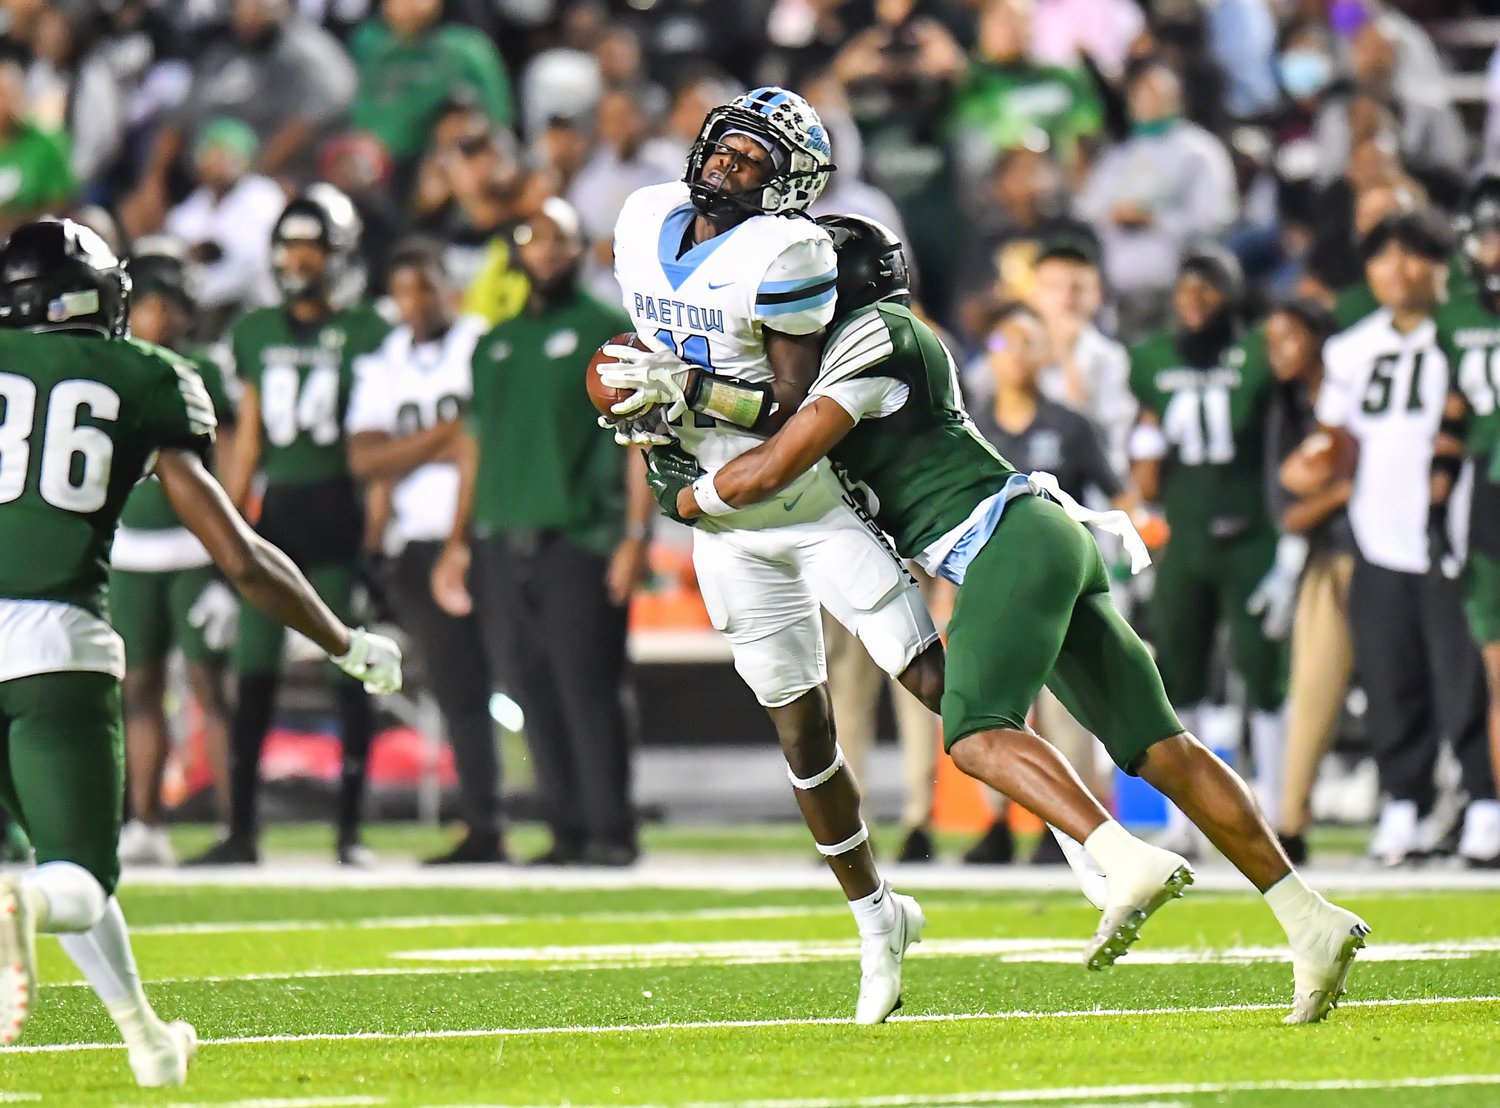 Houston, Tx. Dec 3, 2021: Paetow's Kole Wilson #11 makes the reception during the quarterfinal playoff game between Paetow and F,B. Hightower at Rice Stadium in Houston. (Photo by Mark Gooman / Katy Times)